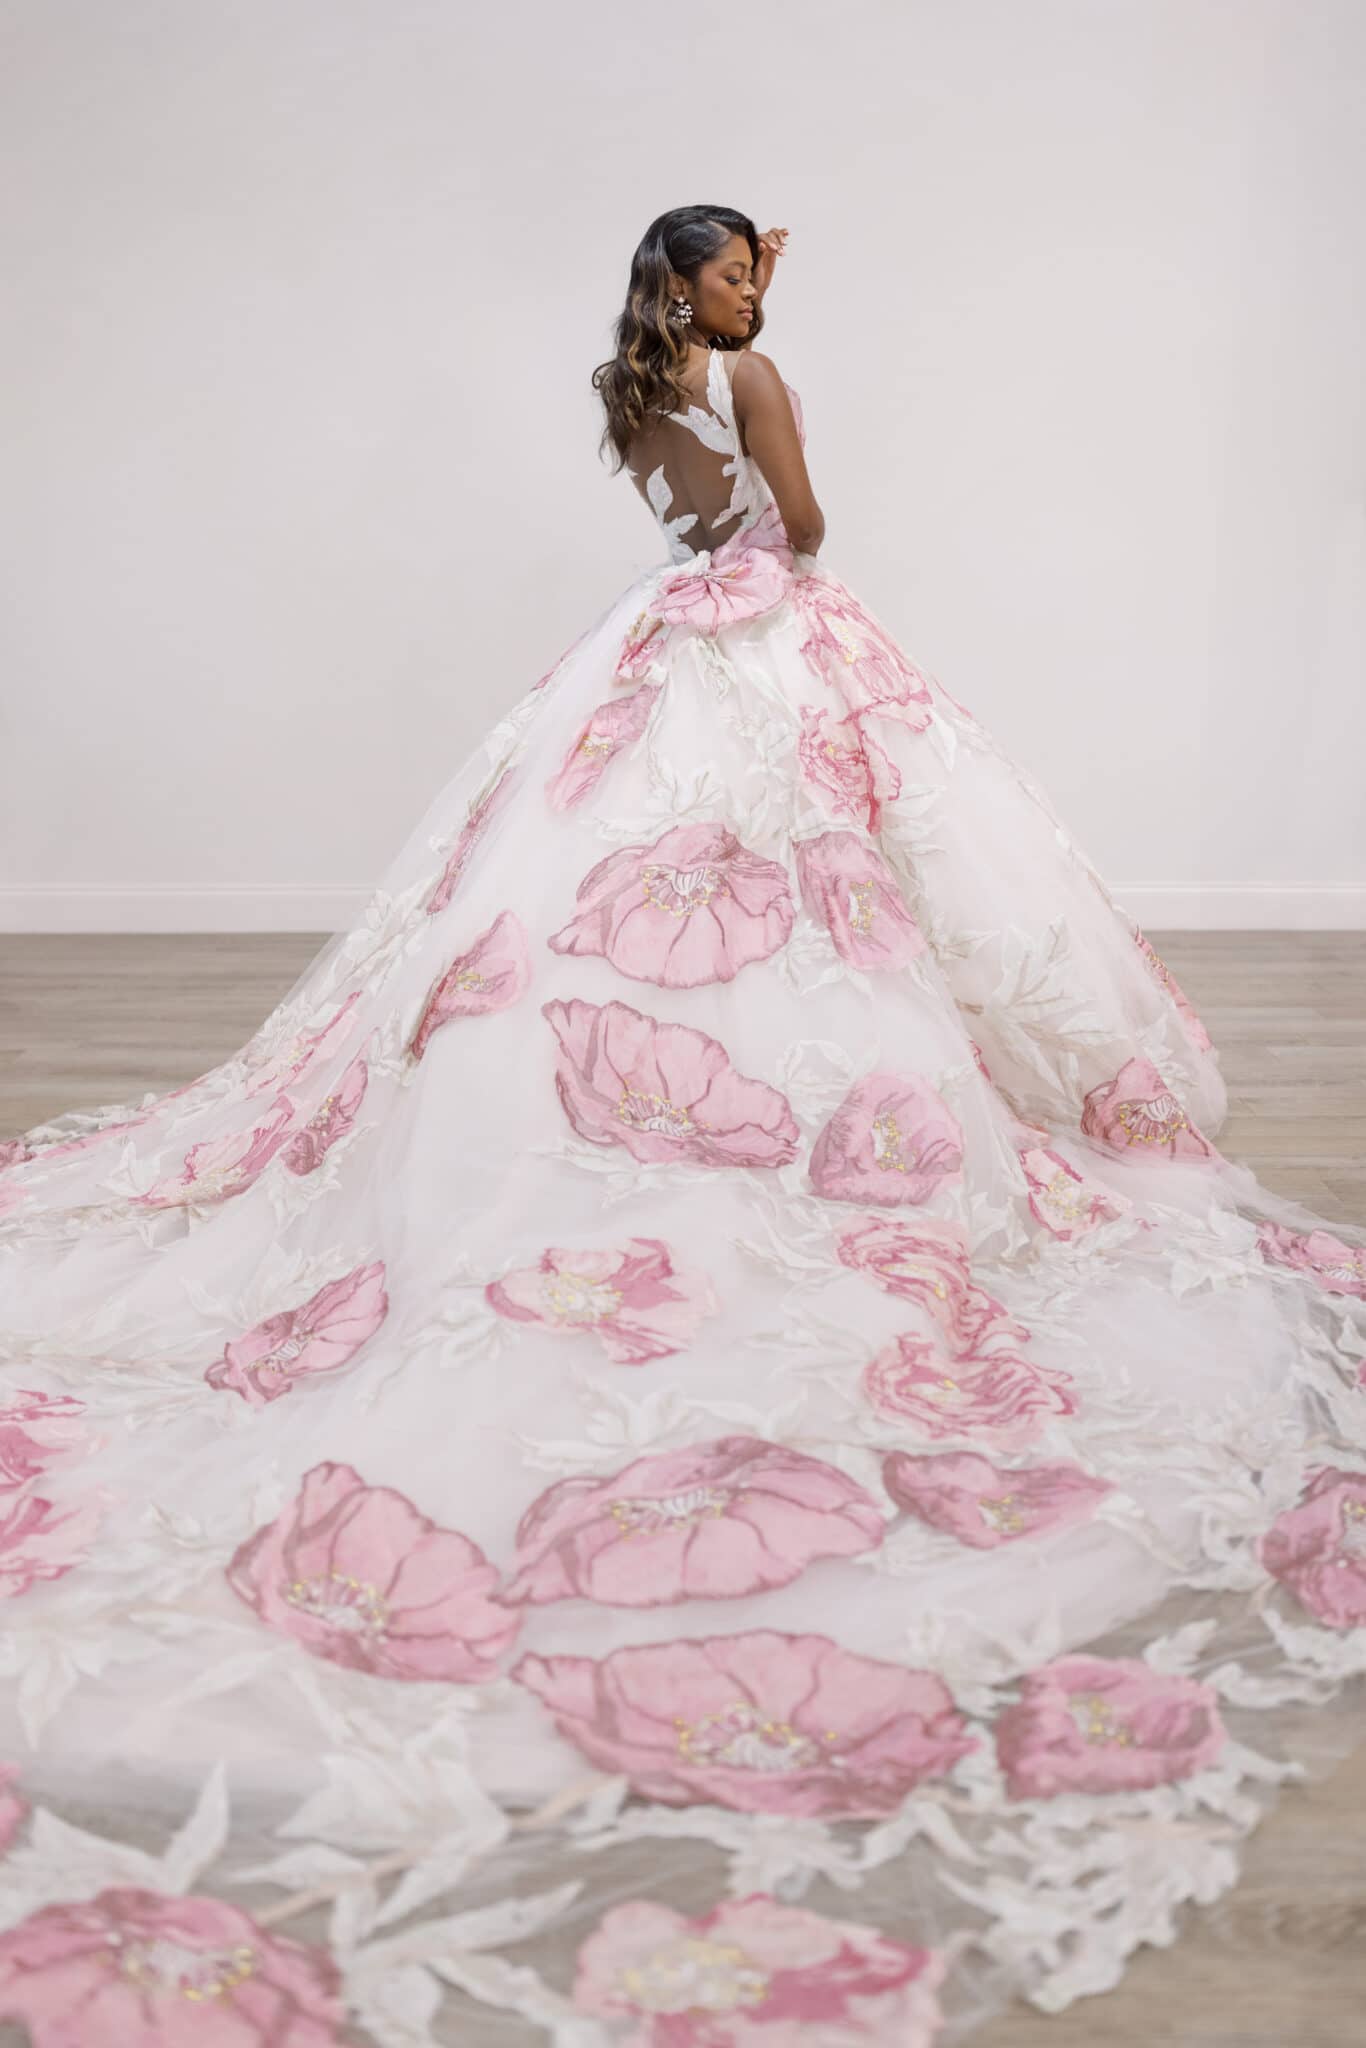 Beautiful bride in her flowing white wedding gown adorned with pink flowers